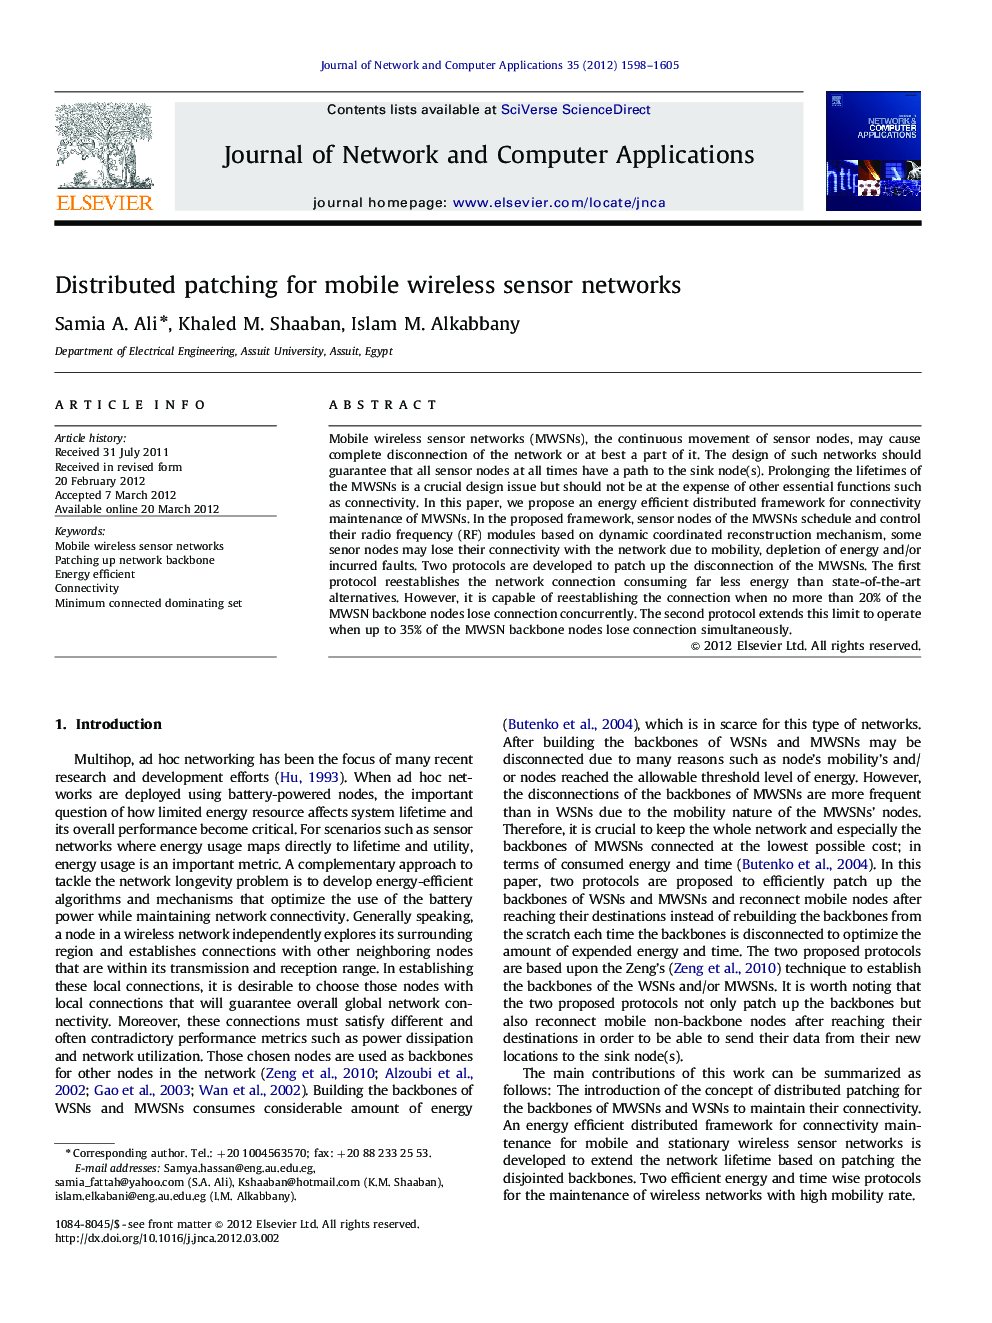 Distributed patching for mobile wireless sensor networks